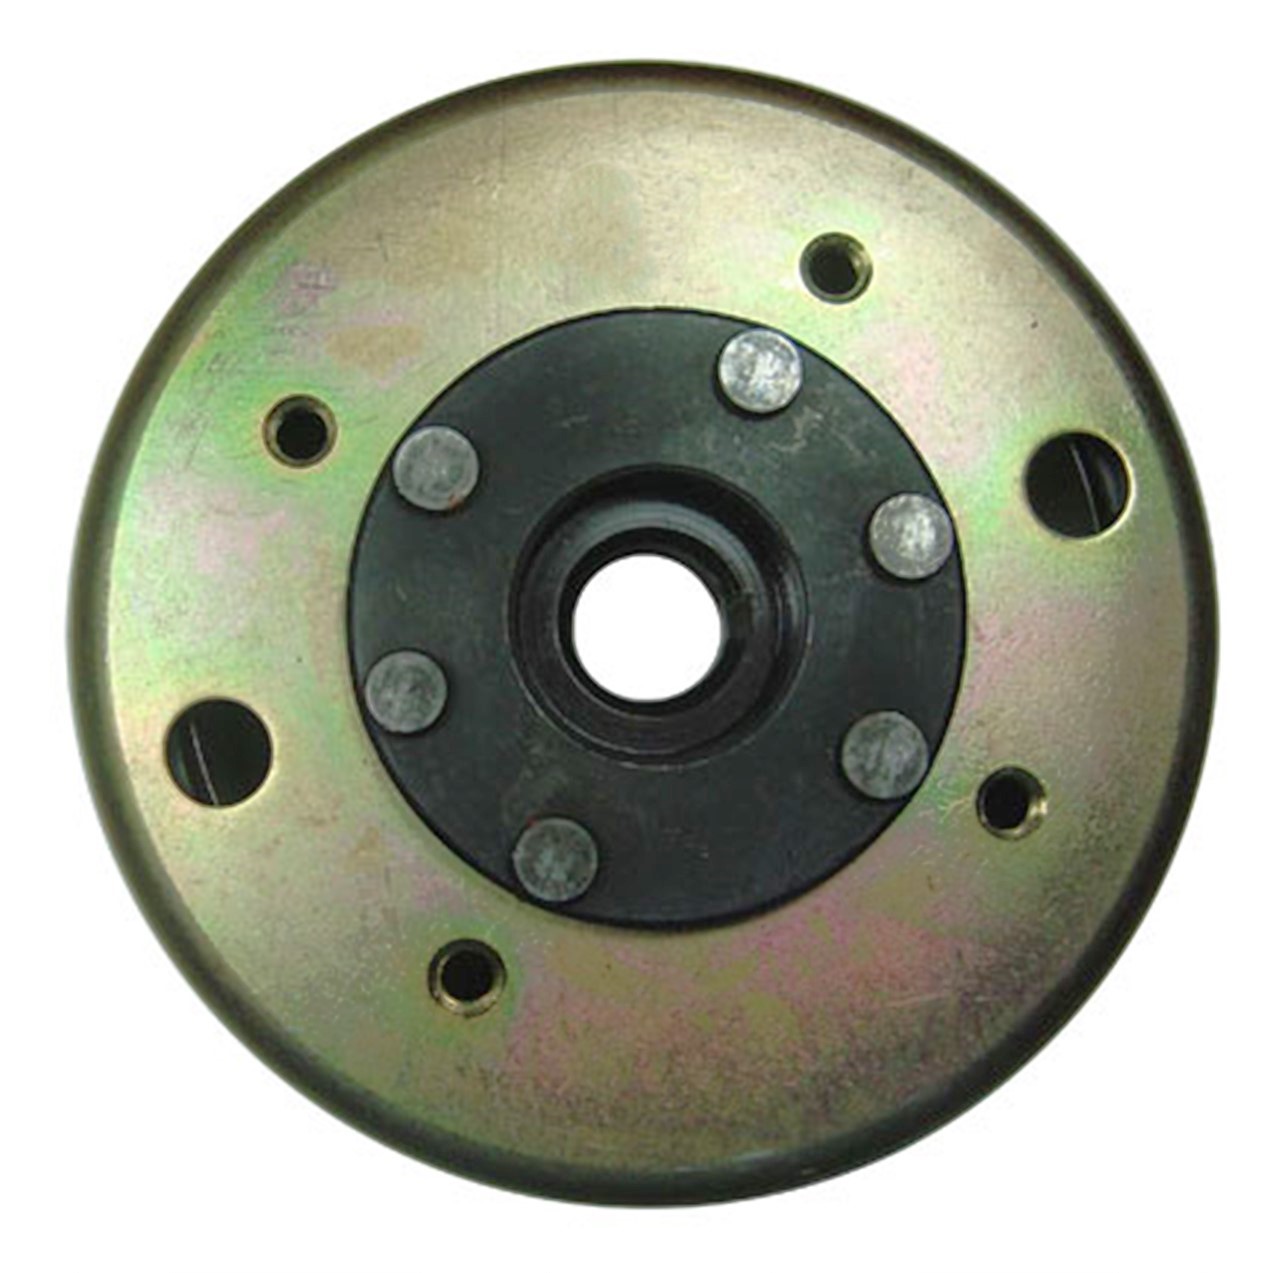 Flywheel Fits E-Ton Yukon YXL150, CXL150, Viper RXL150R, ATVs, Beamer R4-150, Matrix 150 Scooters + Others + More ID= 90mm, Hgt=40mm Shaft (closed side)=15.2, Shaft (open side)=18mm Use Puller# 634192 - Click Image to Close